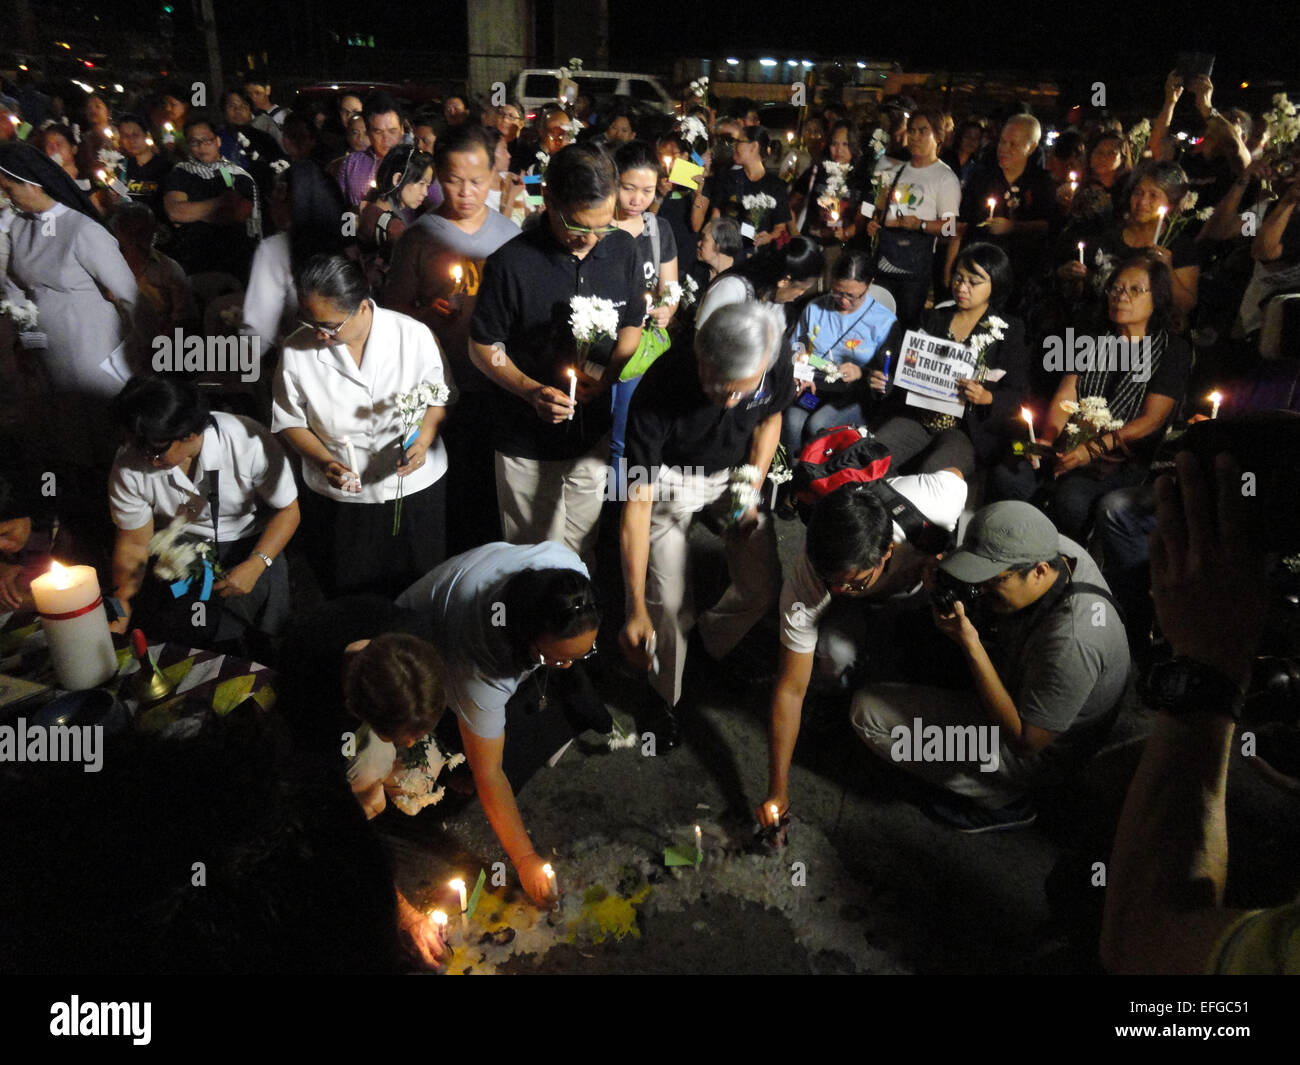 Quezon City, Philippines. 3rd Feb, 2015. Former congressmen Satur Ocampo and Teddy Casino, fourth and fifth from left, take turns in placing candles outside the Philippine National Police headquarters. A mass was celebrated outside the Philippine National Police headquarters as they called for truth and accountability for the casualties of the botched anti-terror operation in Mamasapano, Maguindanao provionce last January 25, including 44 police commandos, as well as several civilians. Credit:  Richard James Mendoza/Pacific Press/Alamy Live News Stock Photo